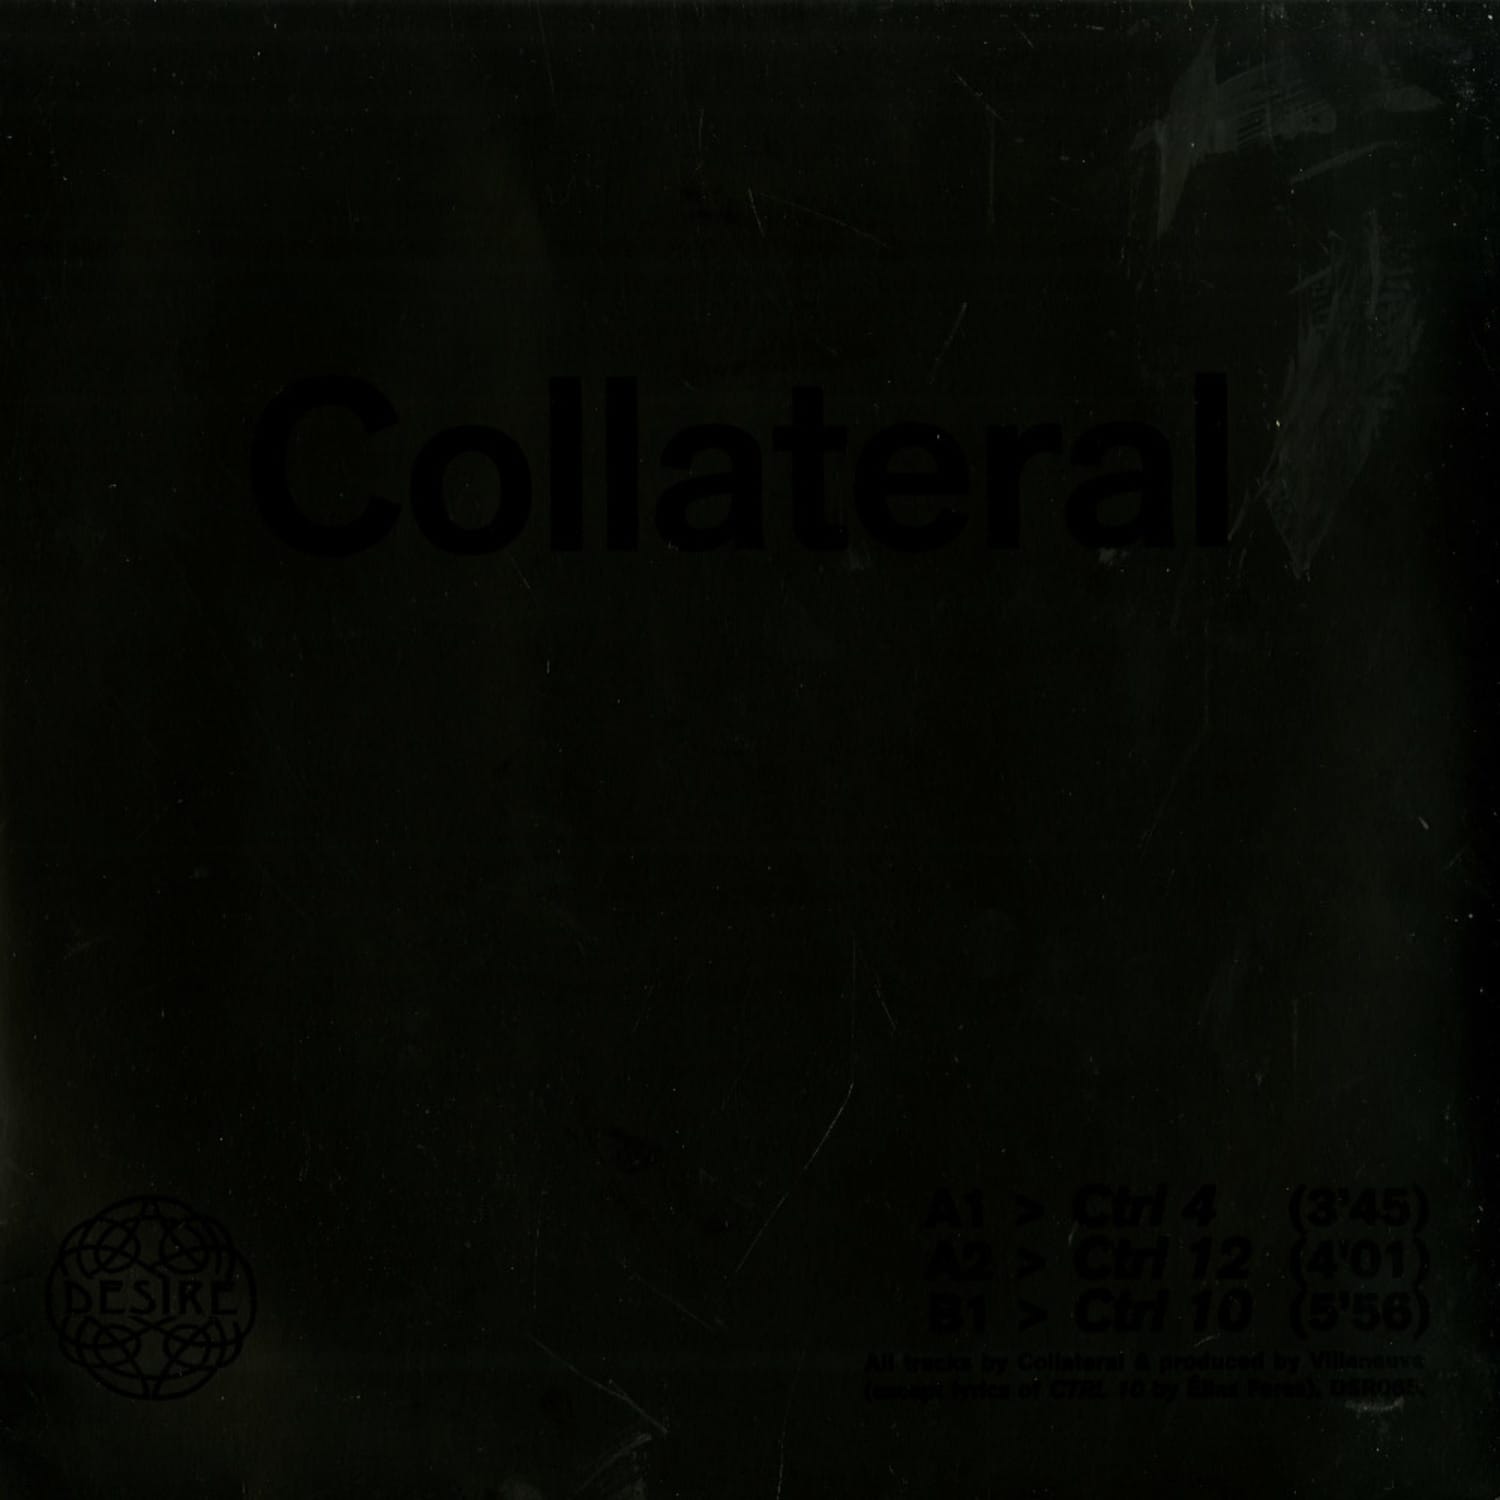 Collateral - BLACK EP